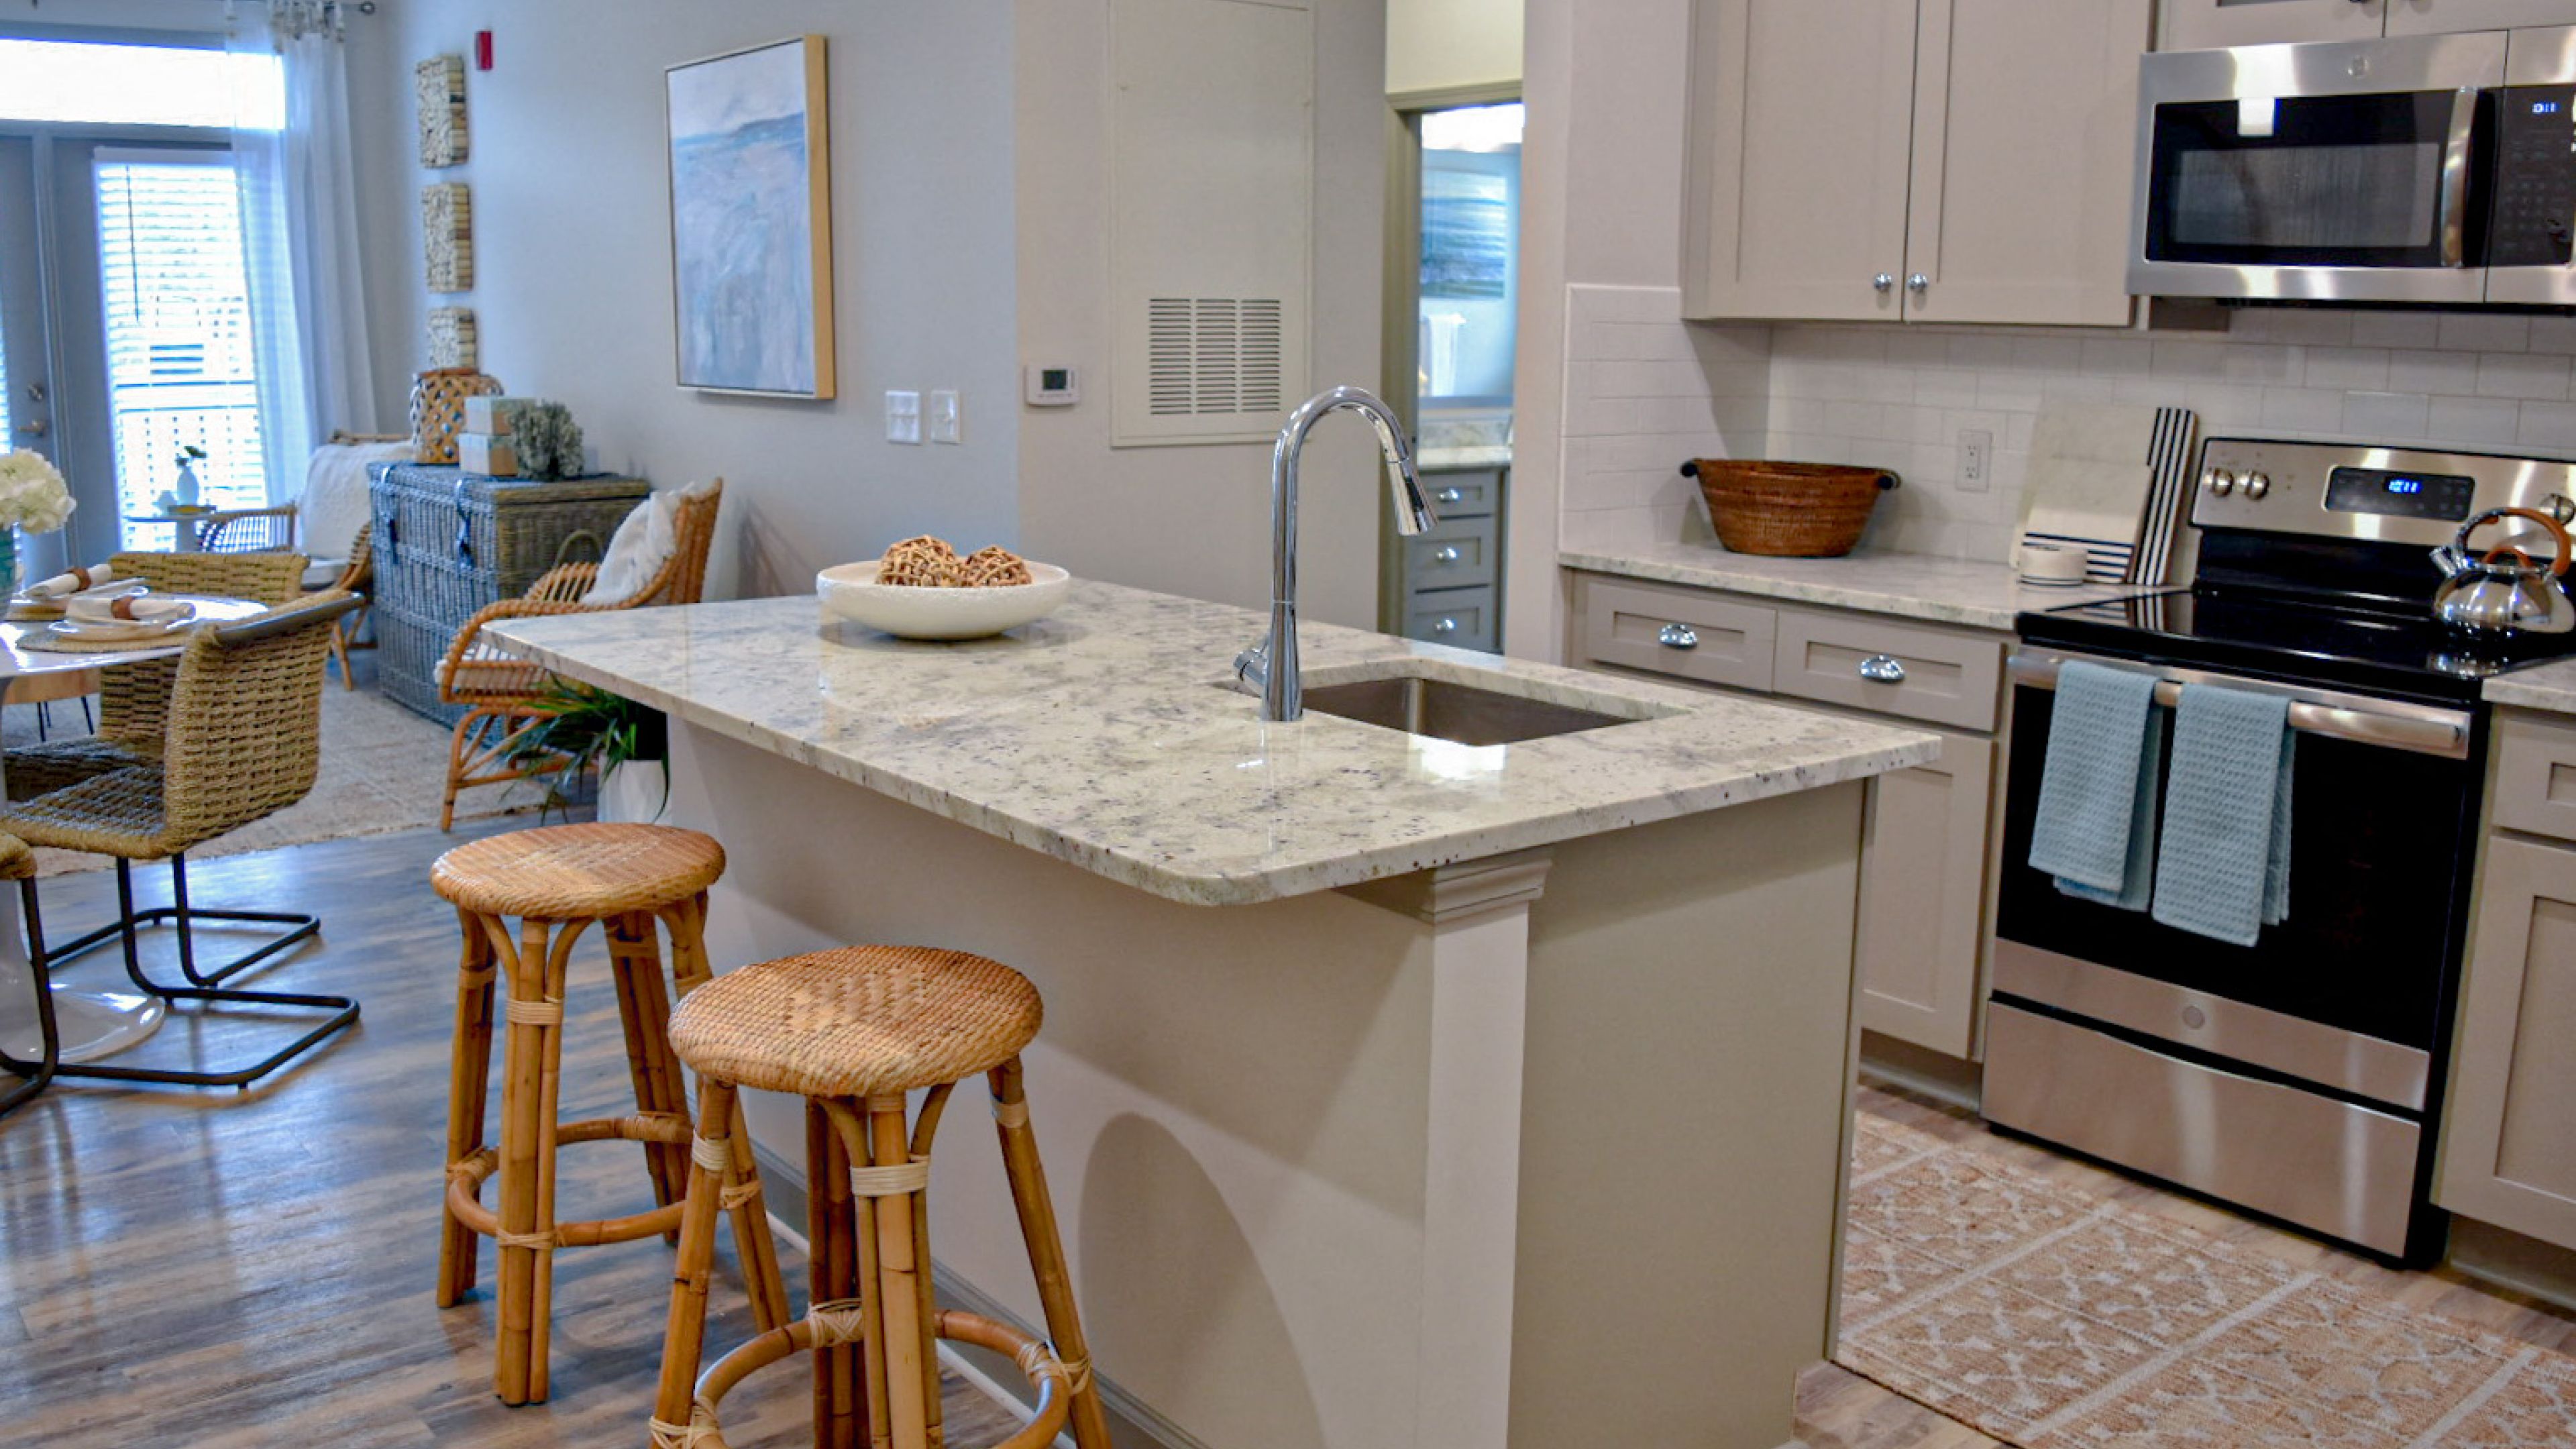 Hawthorne at Smith Creek apartment kitchen with quartz countertops, stainless steel appliances, and ample cabinet storage